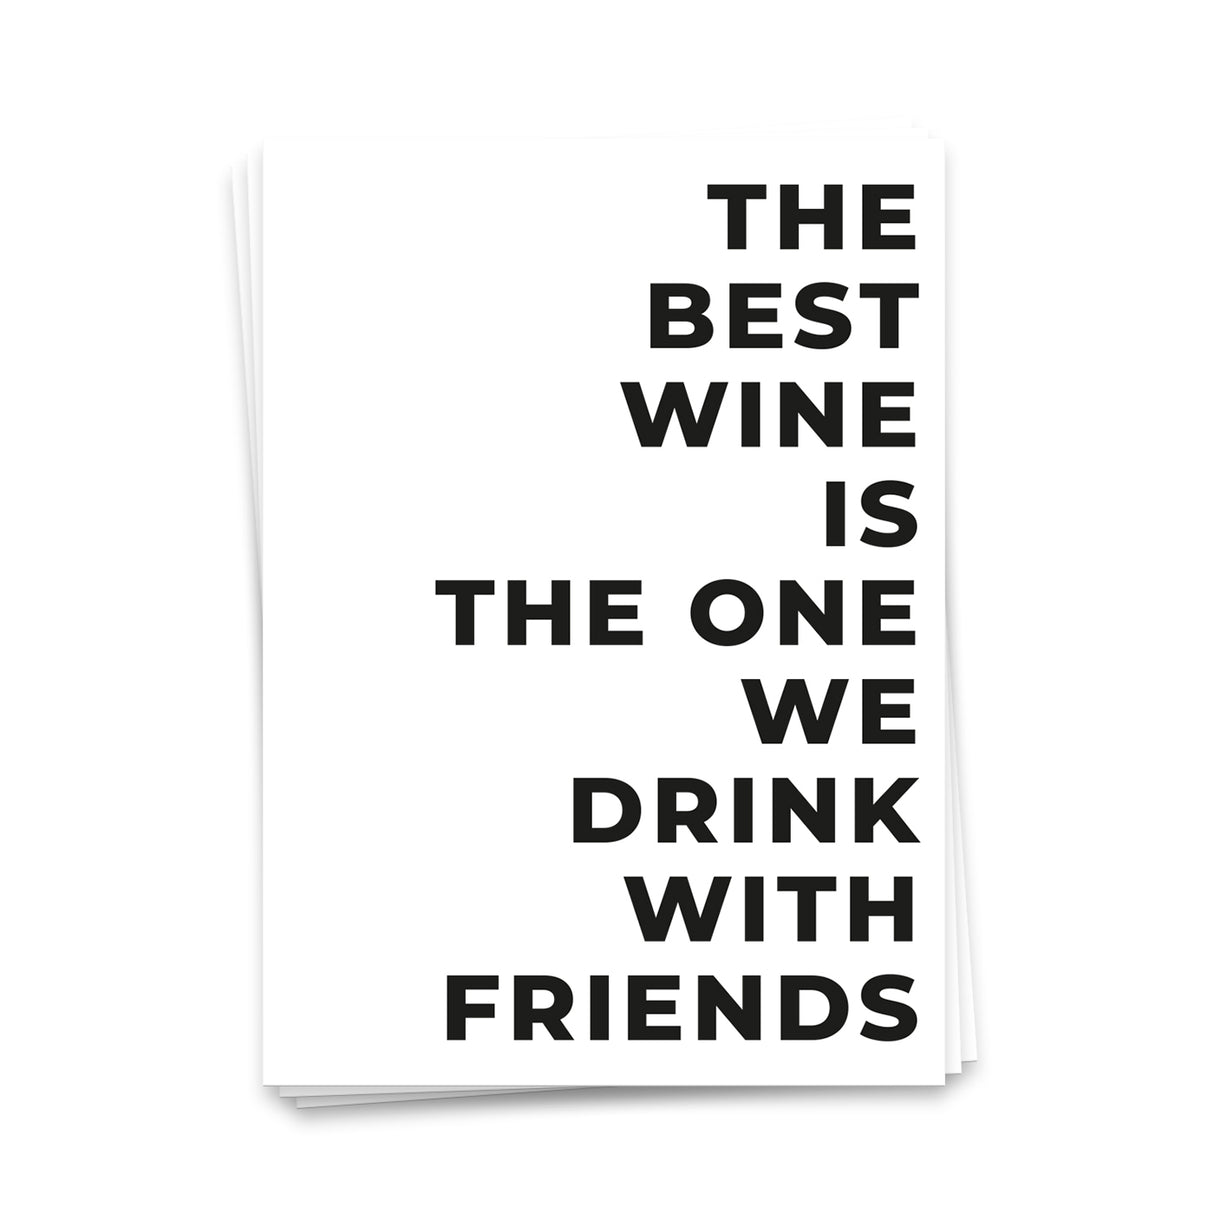 The best wine is the one we drink with friends - Postkarte